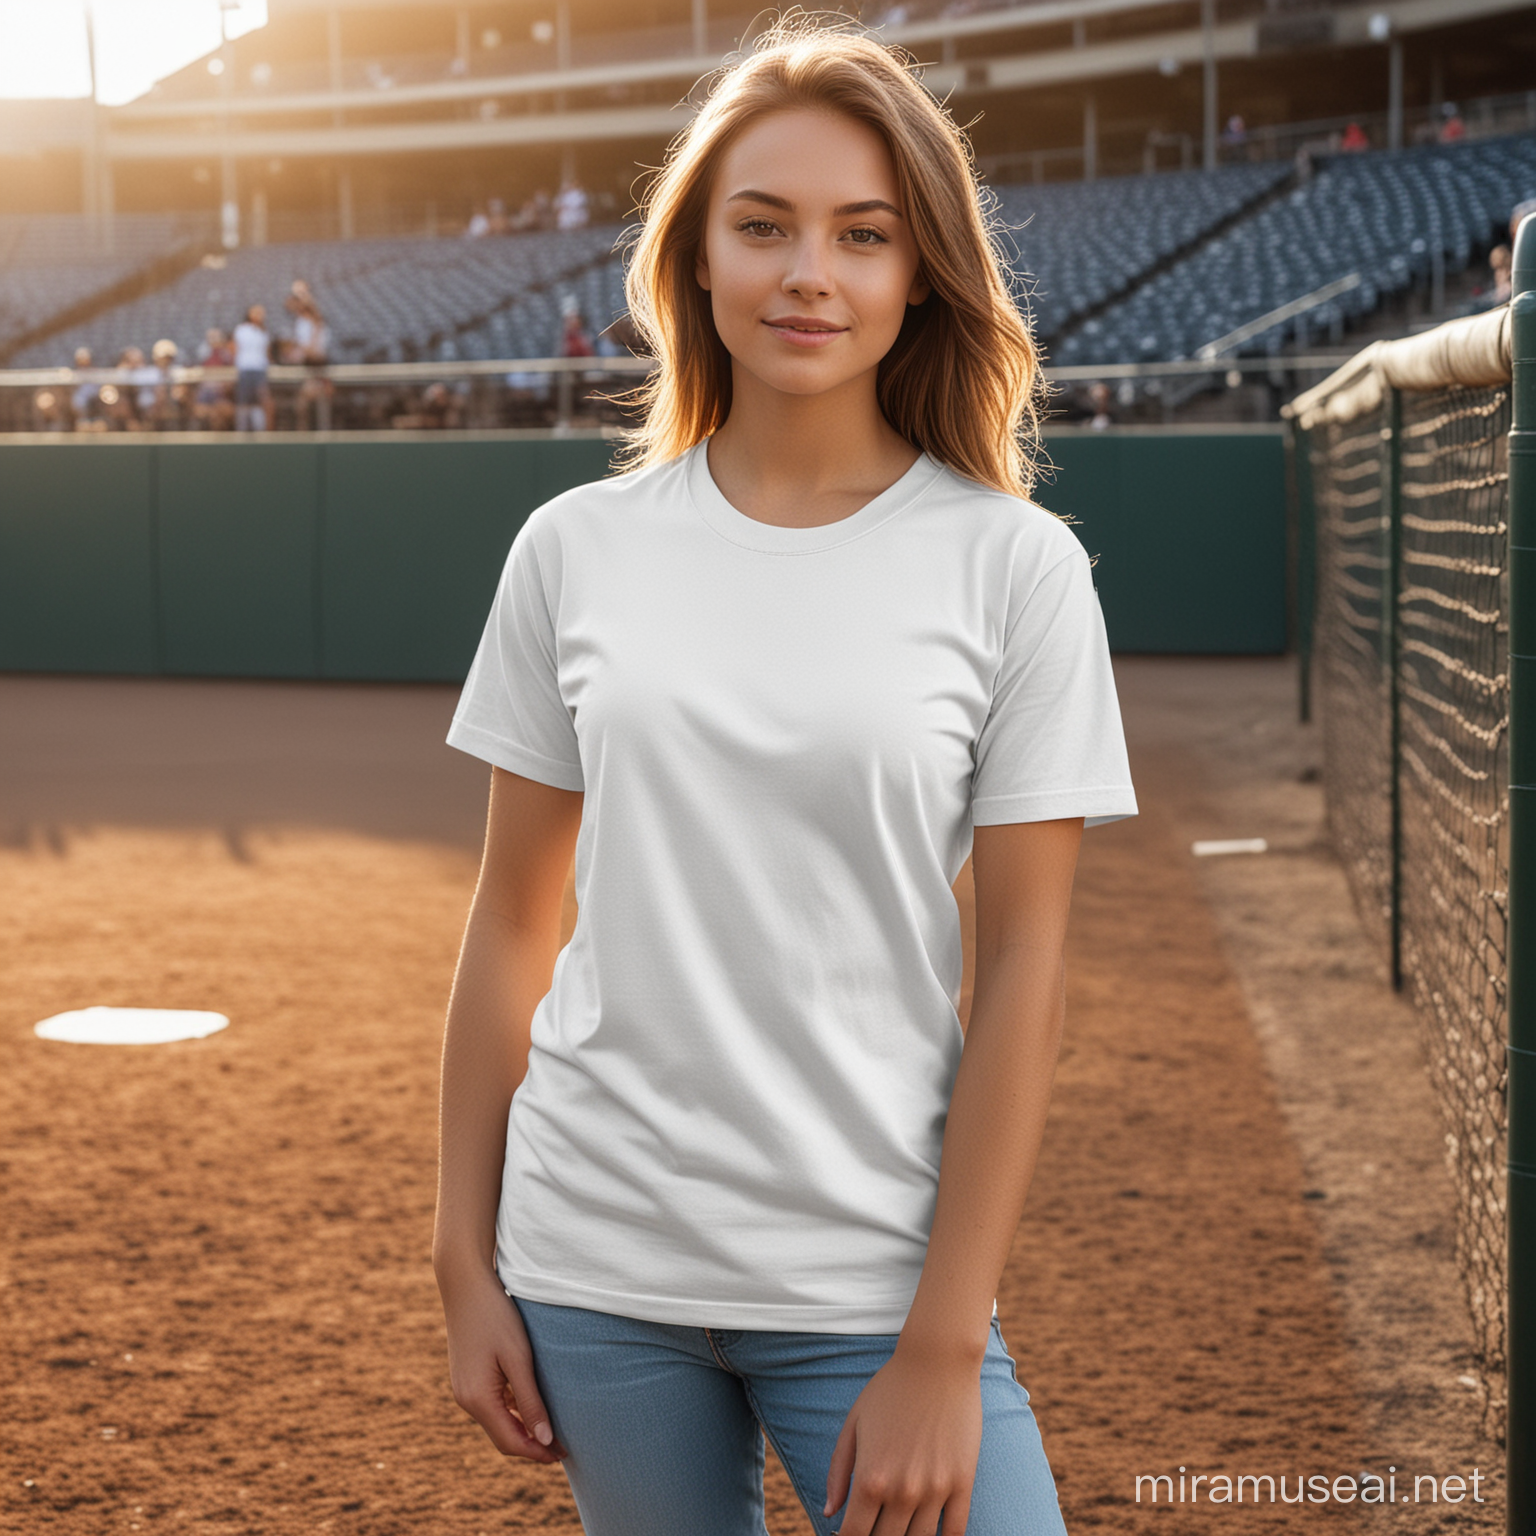 
Create a captivating mockup featuring a girl wearing the blank Gildan 64000 t-shirt white in color free from logo free from logo on t-short 
 on a serene baseball field. Pay meticulous attention to detail to ensure the t-shirt is devoid of any logos or designs, accentuating its pure and versatile essence. Focus on portraying the girl's appearance, posture, and attire with utmost realism, capturing the authenticity of her presence amidst the field's natural beauty.

Utilize advanced lighting and shadow effects to imbue the scene with a sense of depth and immersion, evoking the warm glow of a sunlit day at the ballpark. Showcase the simplicity and comfort of the Gildan 64000 t-shirt as the perfect choice for casual wear in any outdoor setting, allowing the viewer to envision themselves in the serene tranquility of the baseball field.